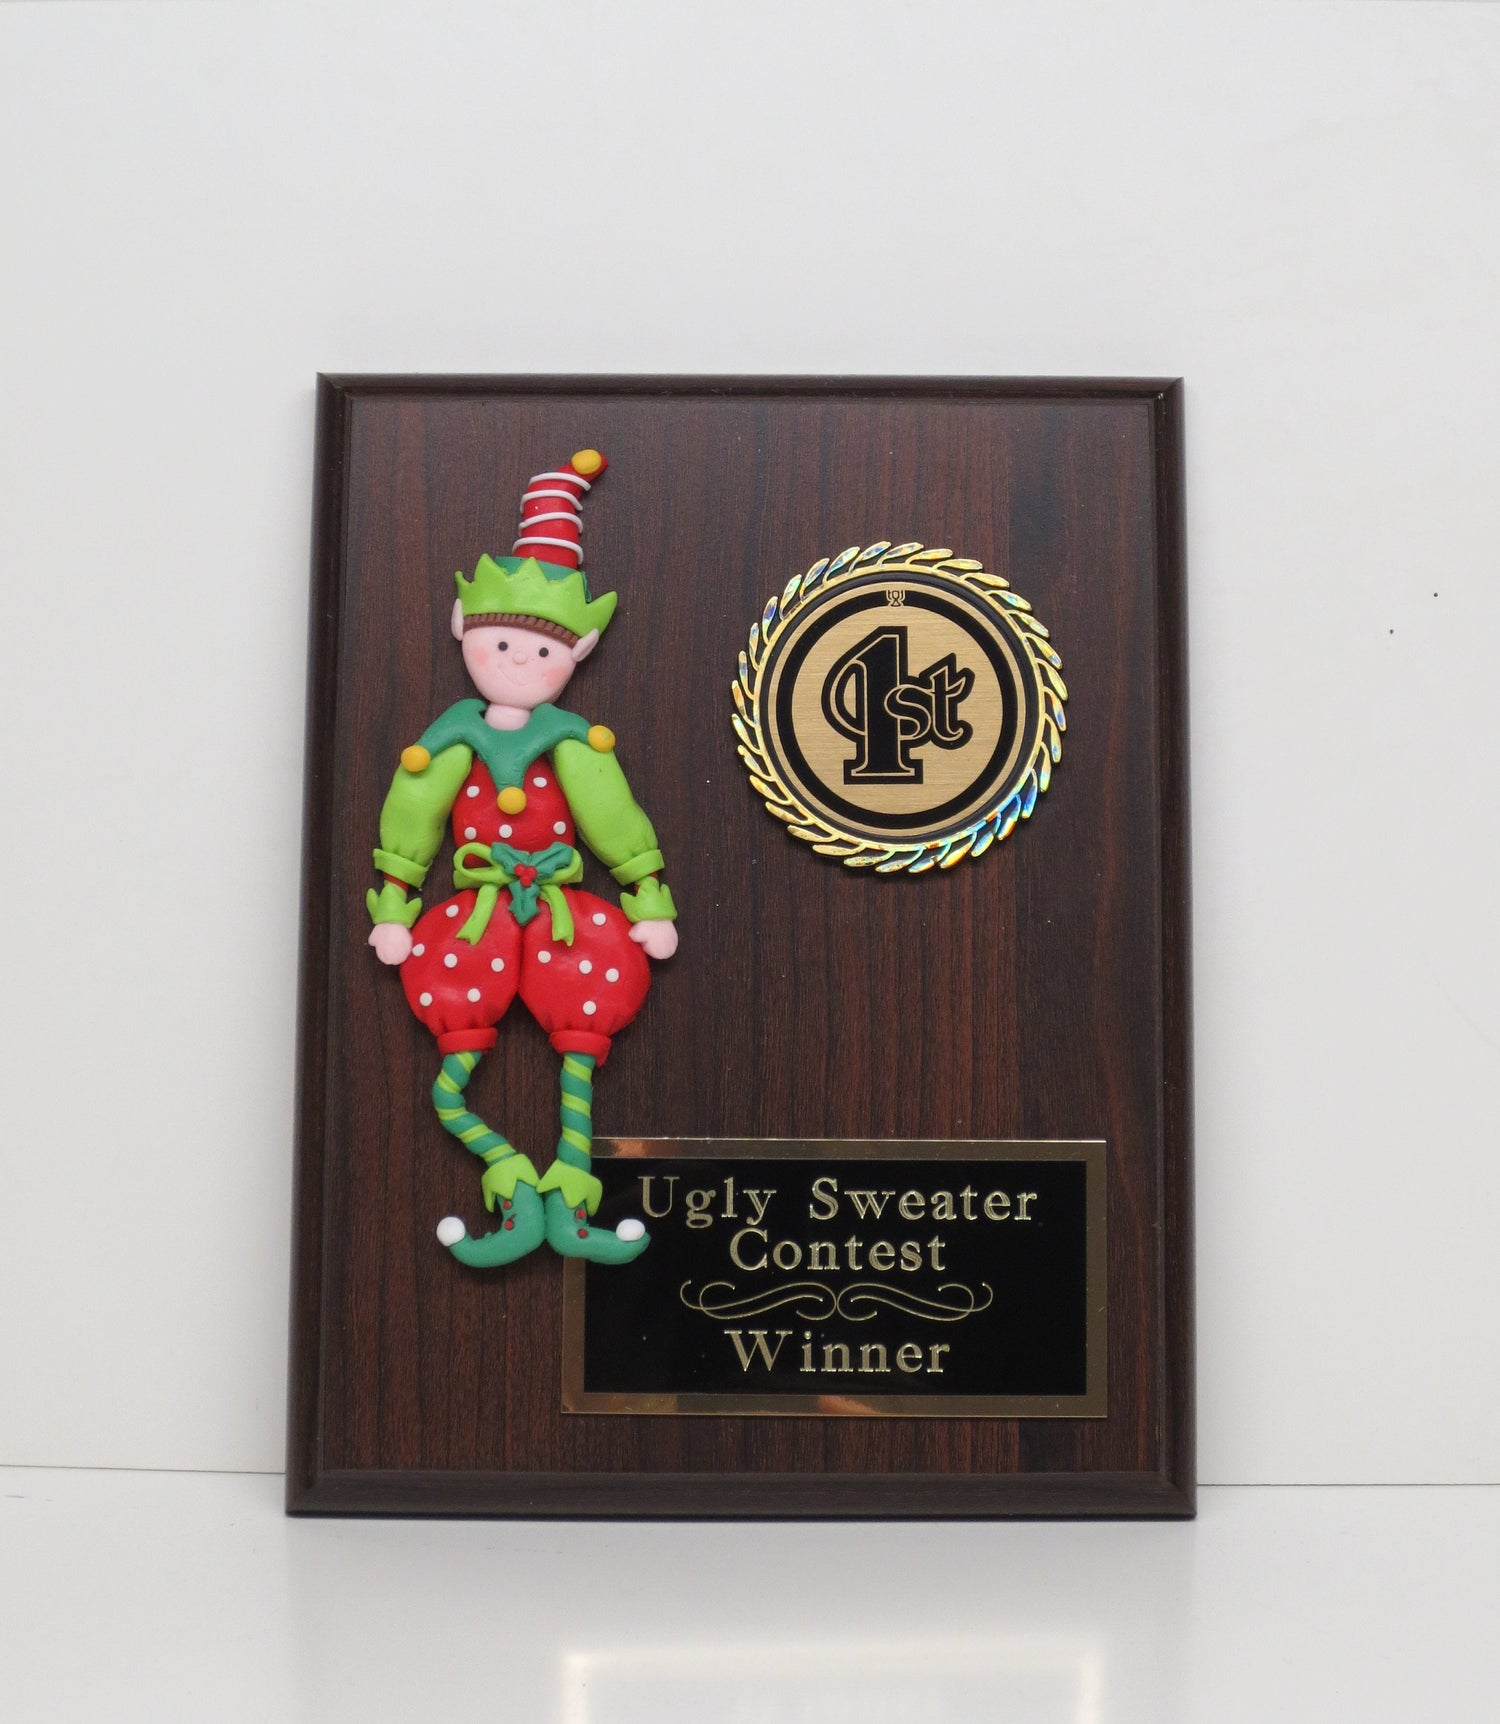 Ugliest Ugly Sweater Trophy Plaque Elf Best Decorated Door Office House Gingerbread Cookie Bake Off Contest Holiday Christmas Decor